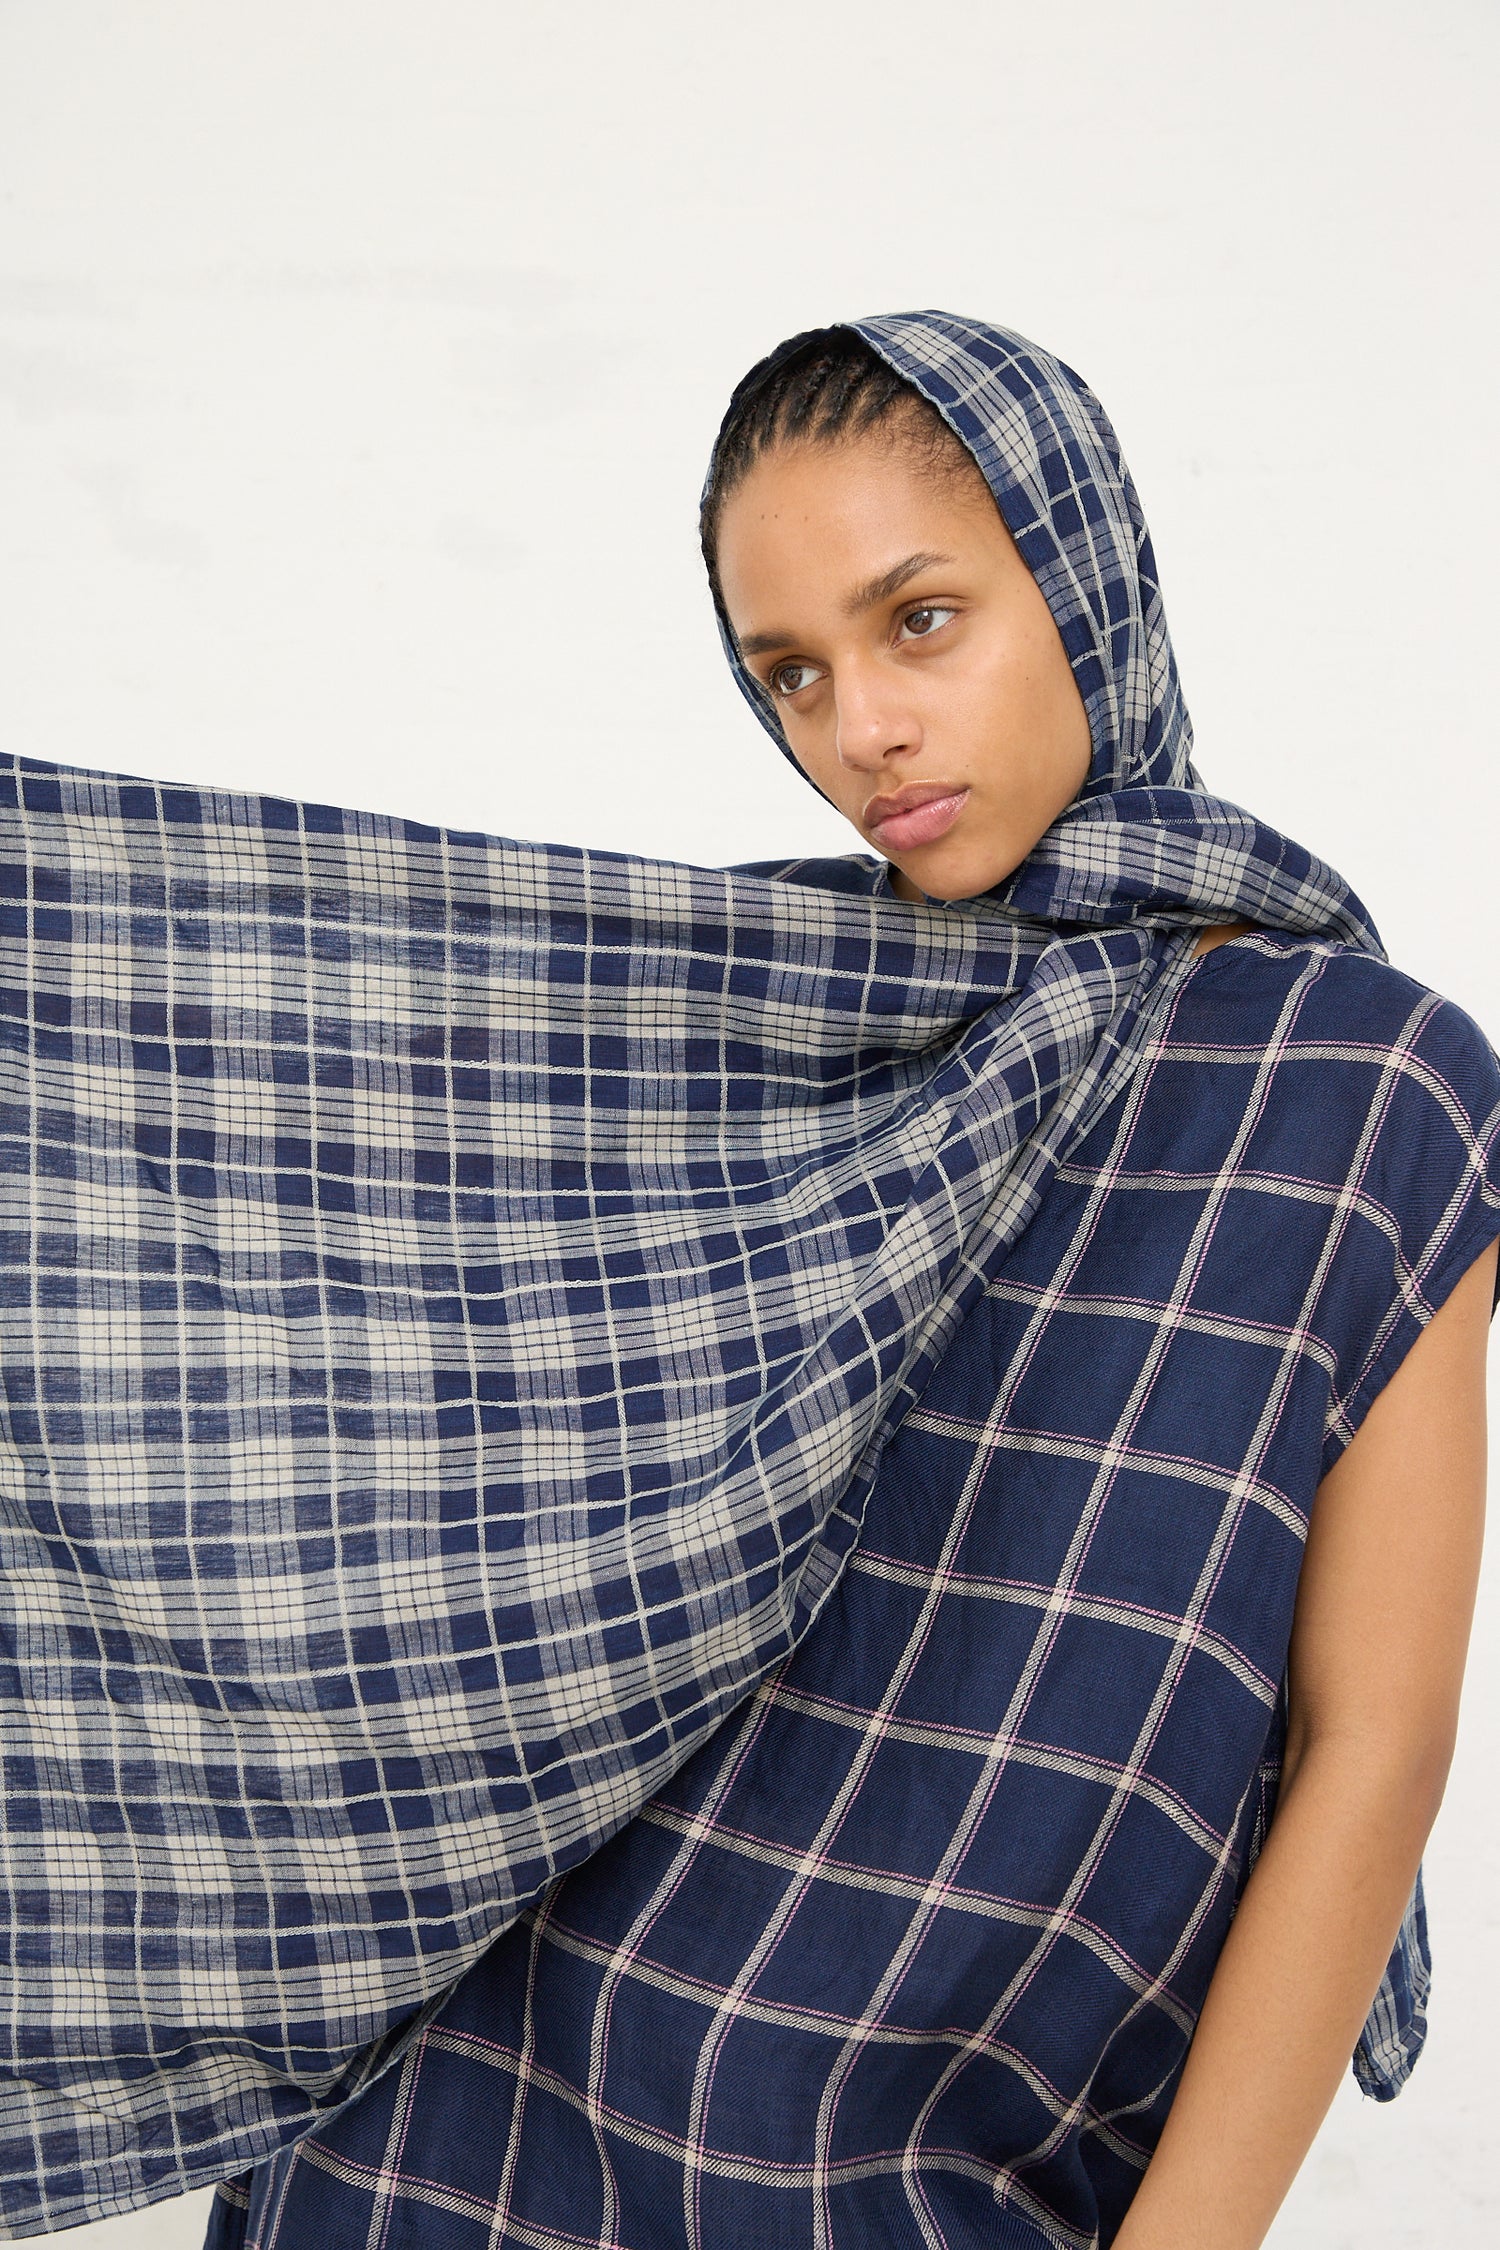 Woman draped in a Linen Check Stole in Dark Indigo and Natural from Ichi Antiquités against a white background.